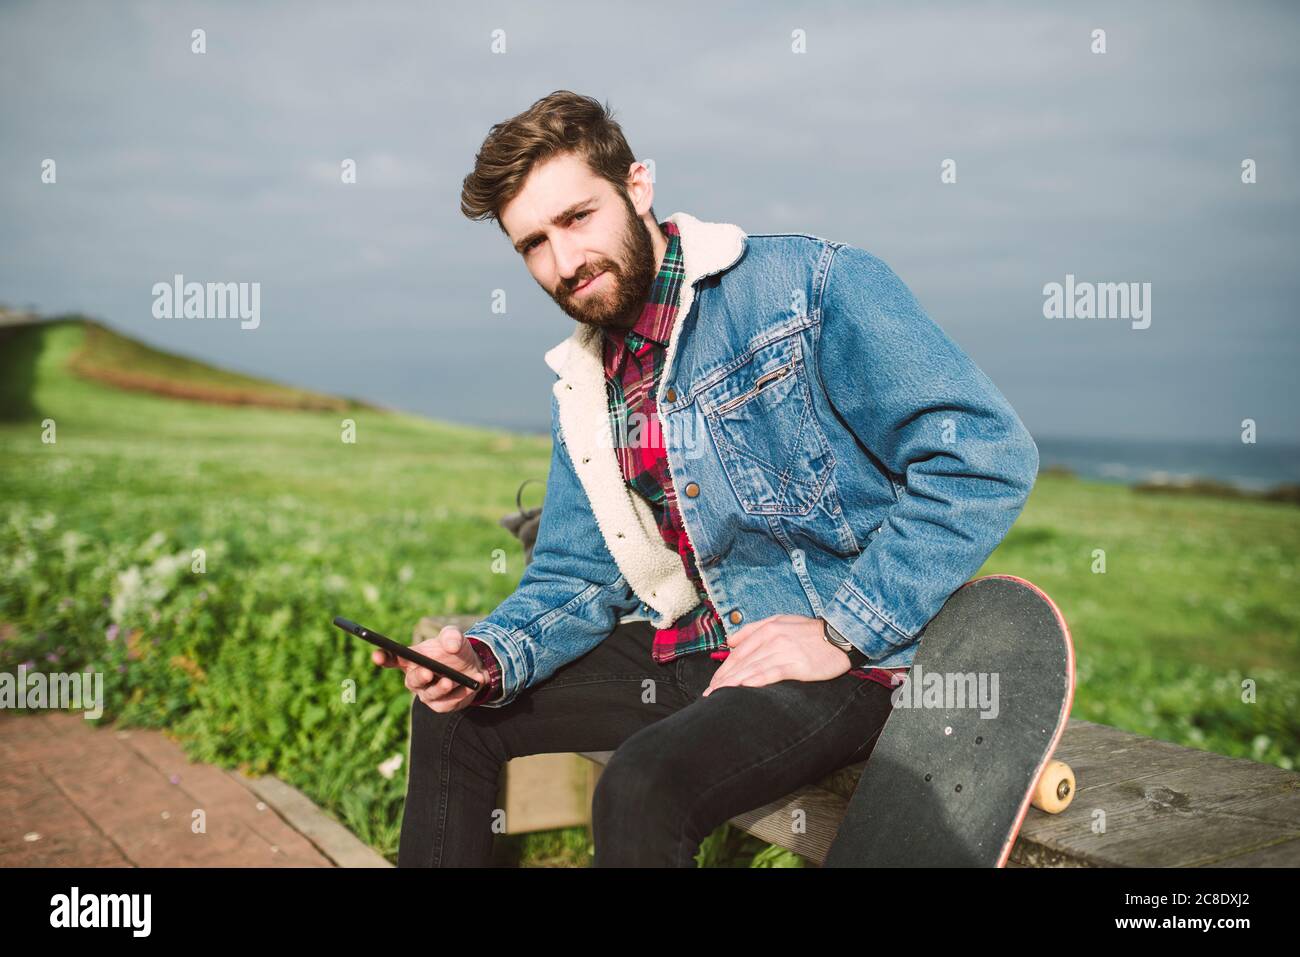 Handsome man using smart phone while sitting with skateboard on seat against cloudy sky Stock Photo